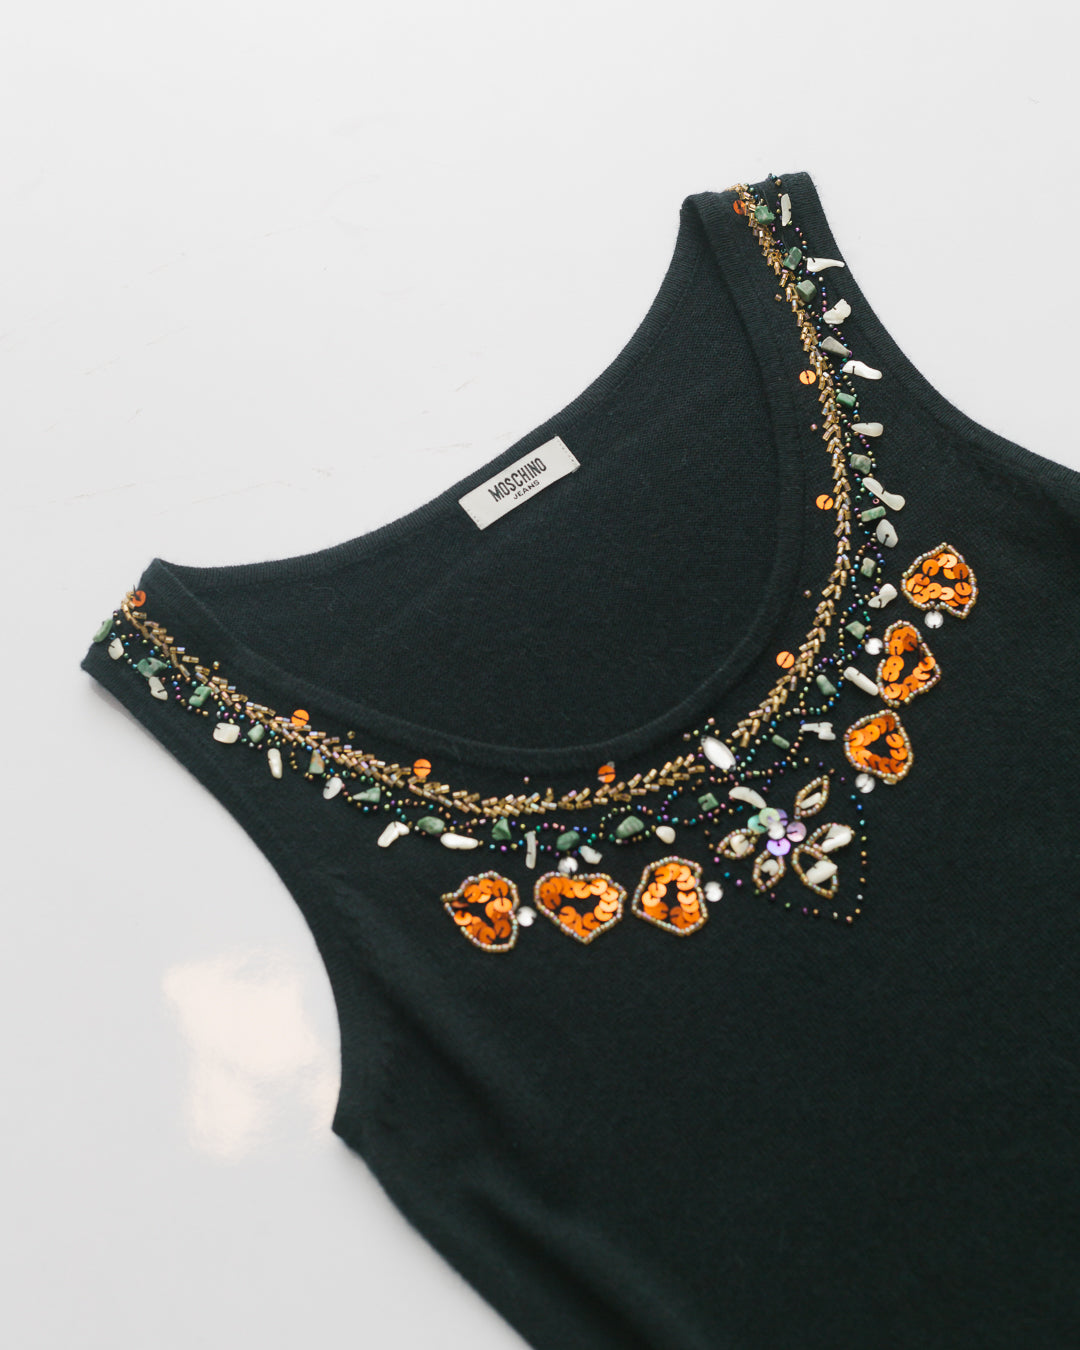 Moschino Embellished Tank Top